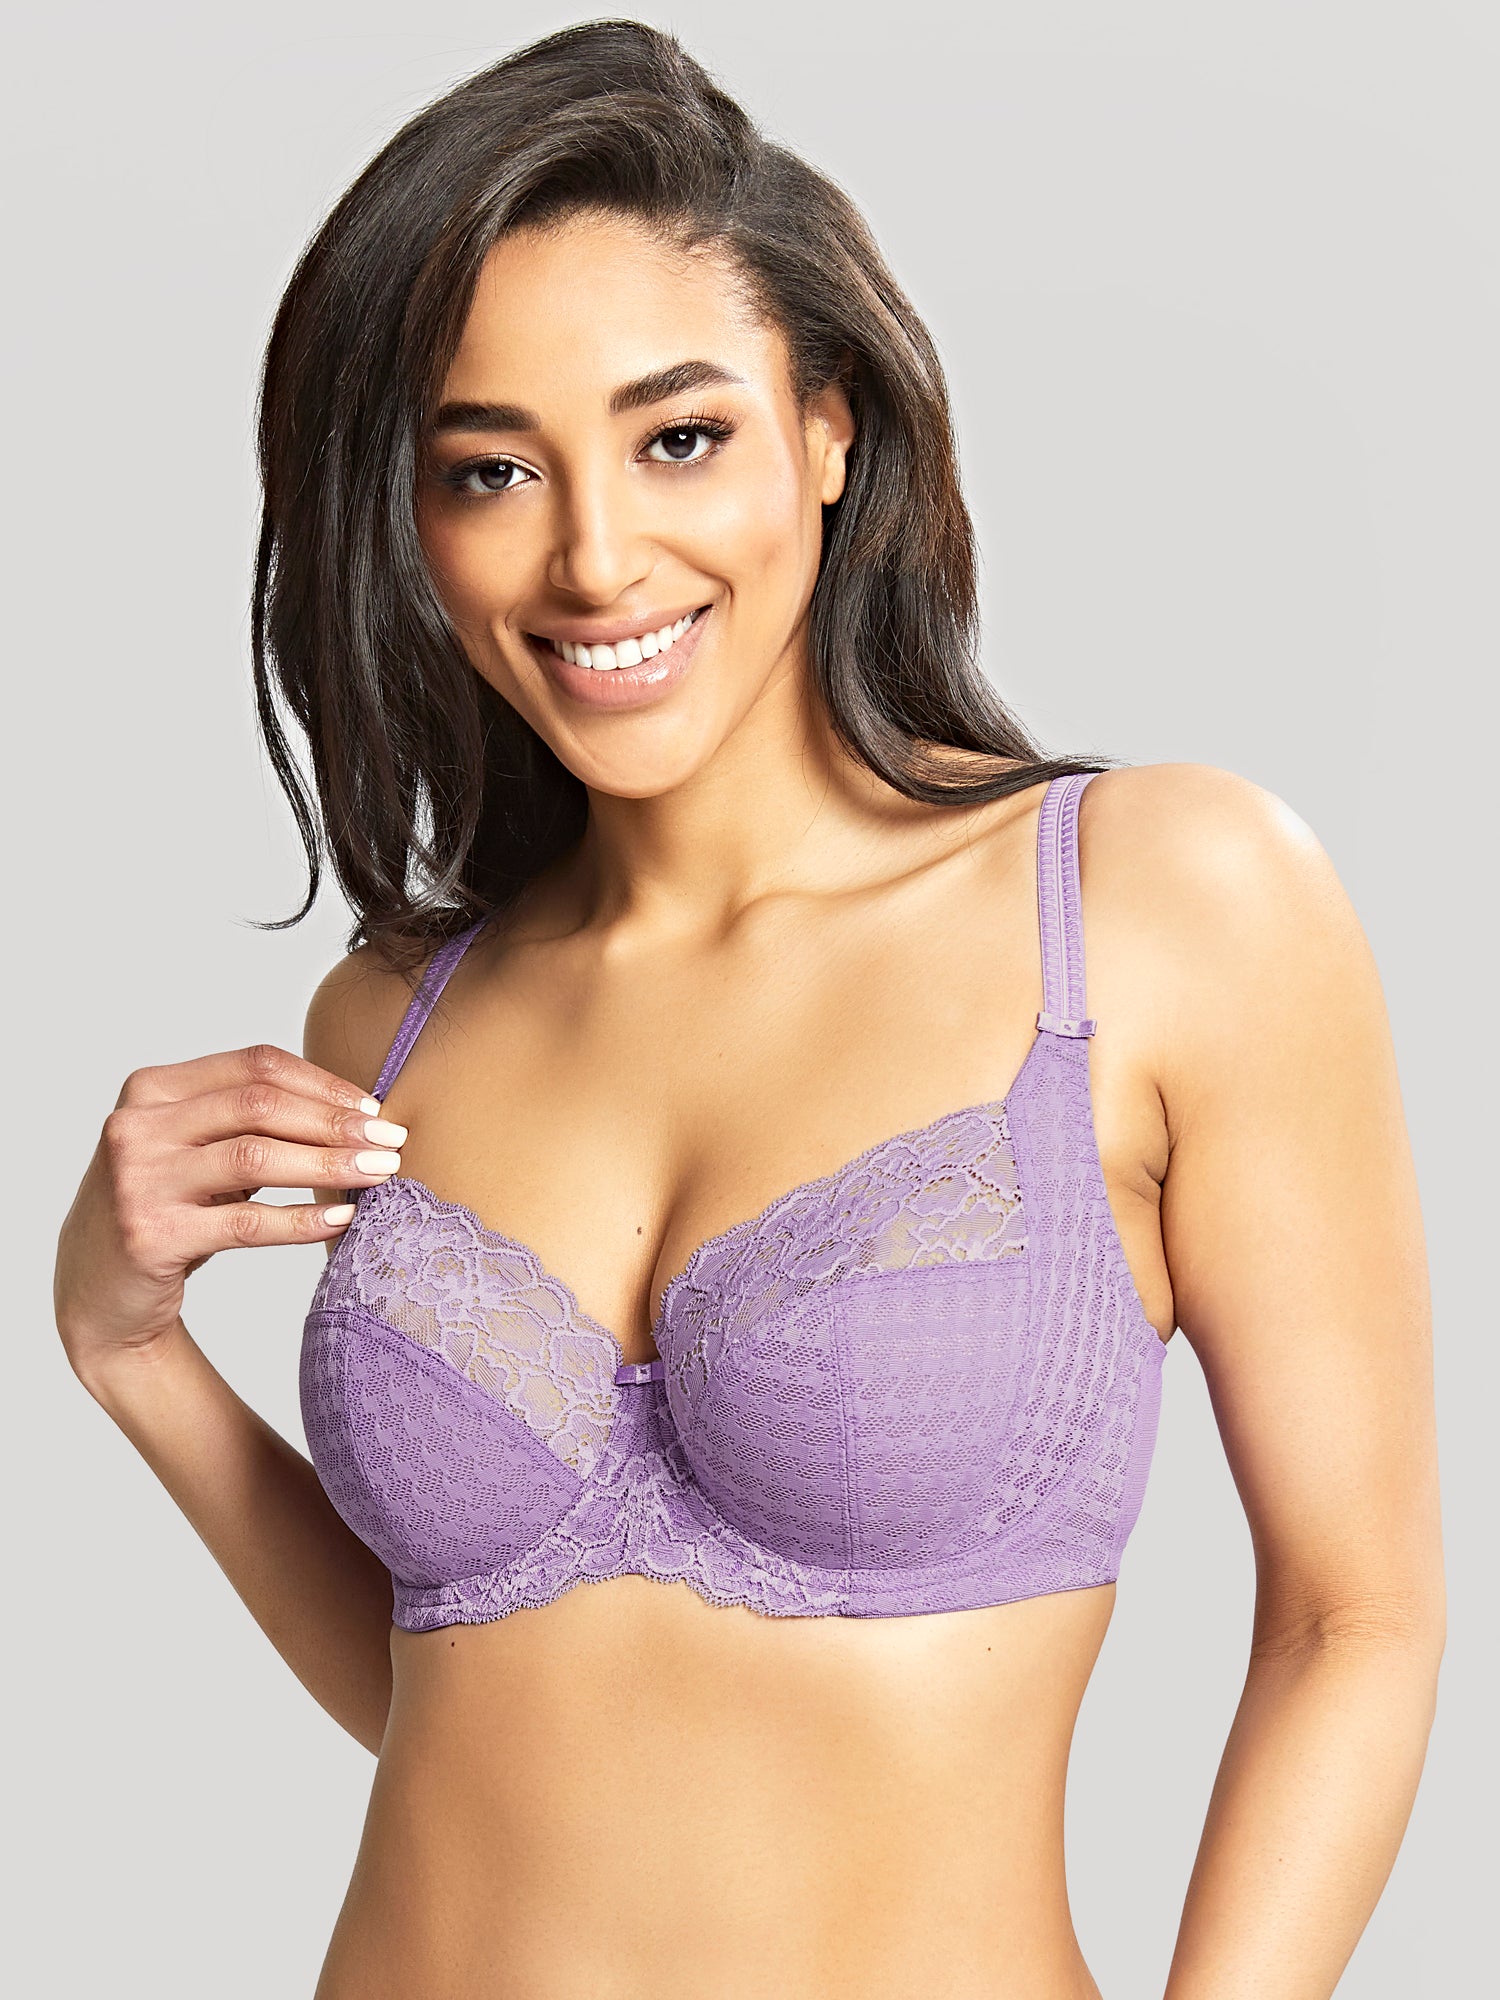 Panache Envy Full Cup Bra in Orchid FINAL SALE (30% Off)